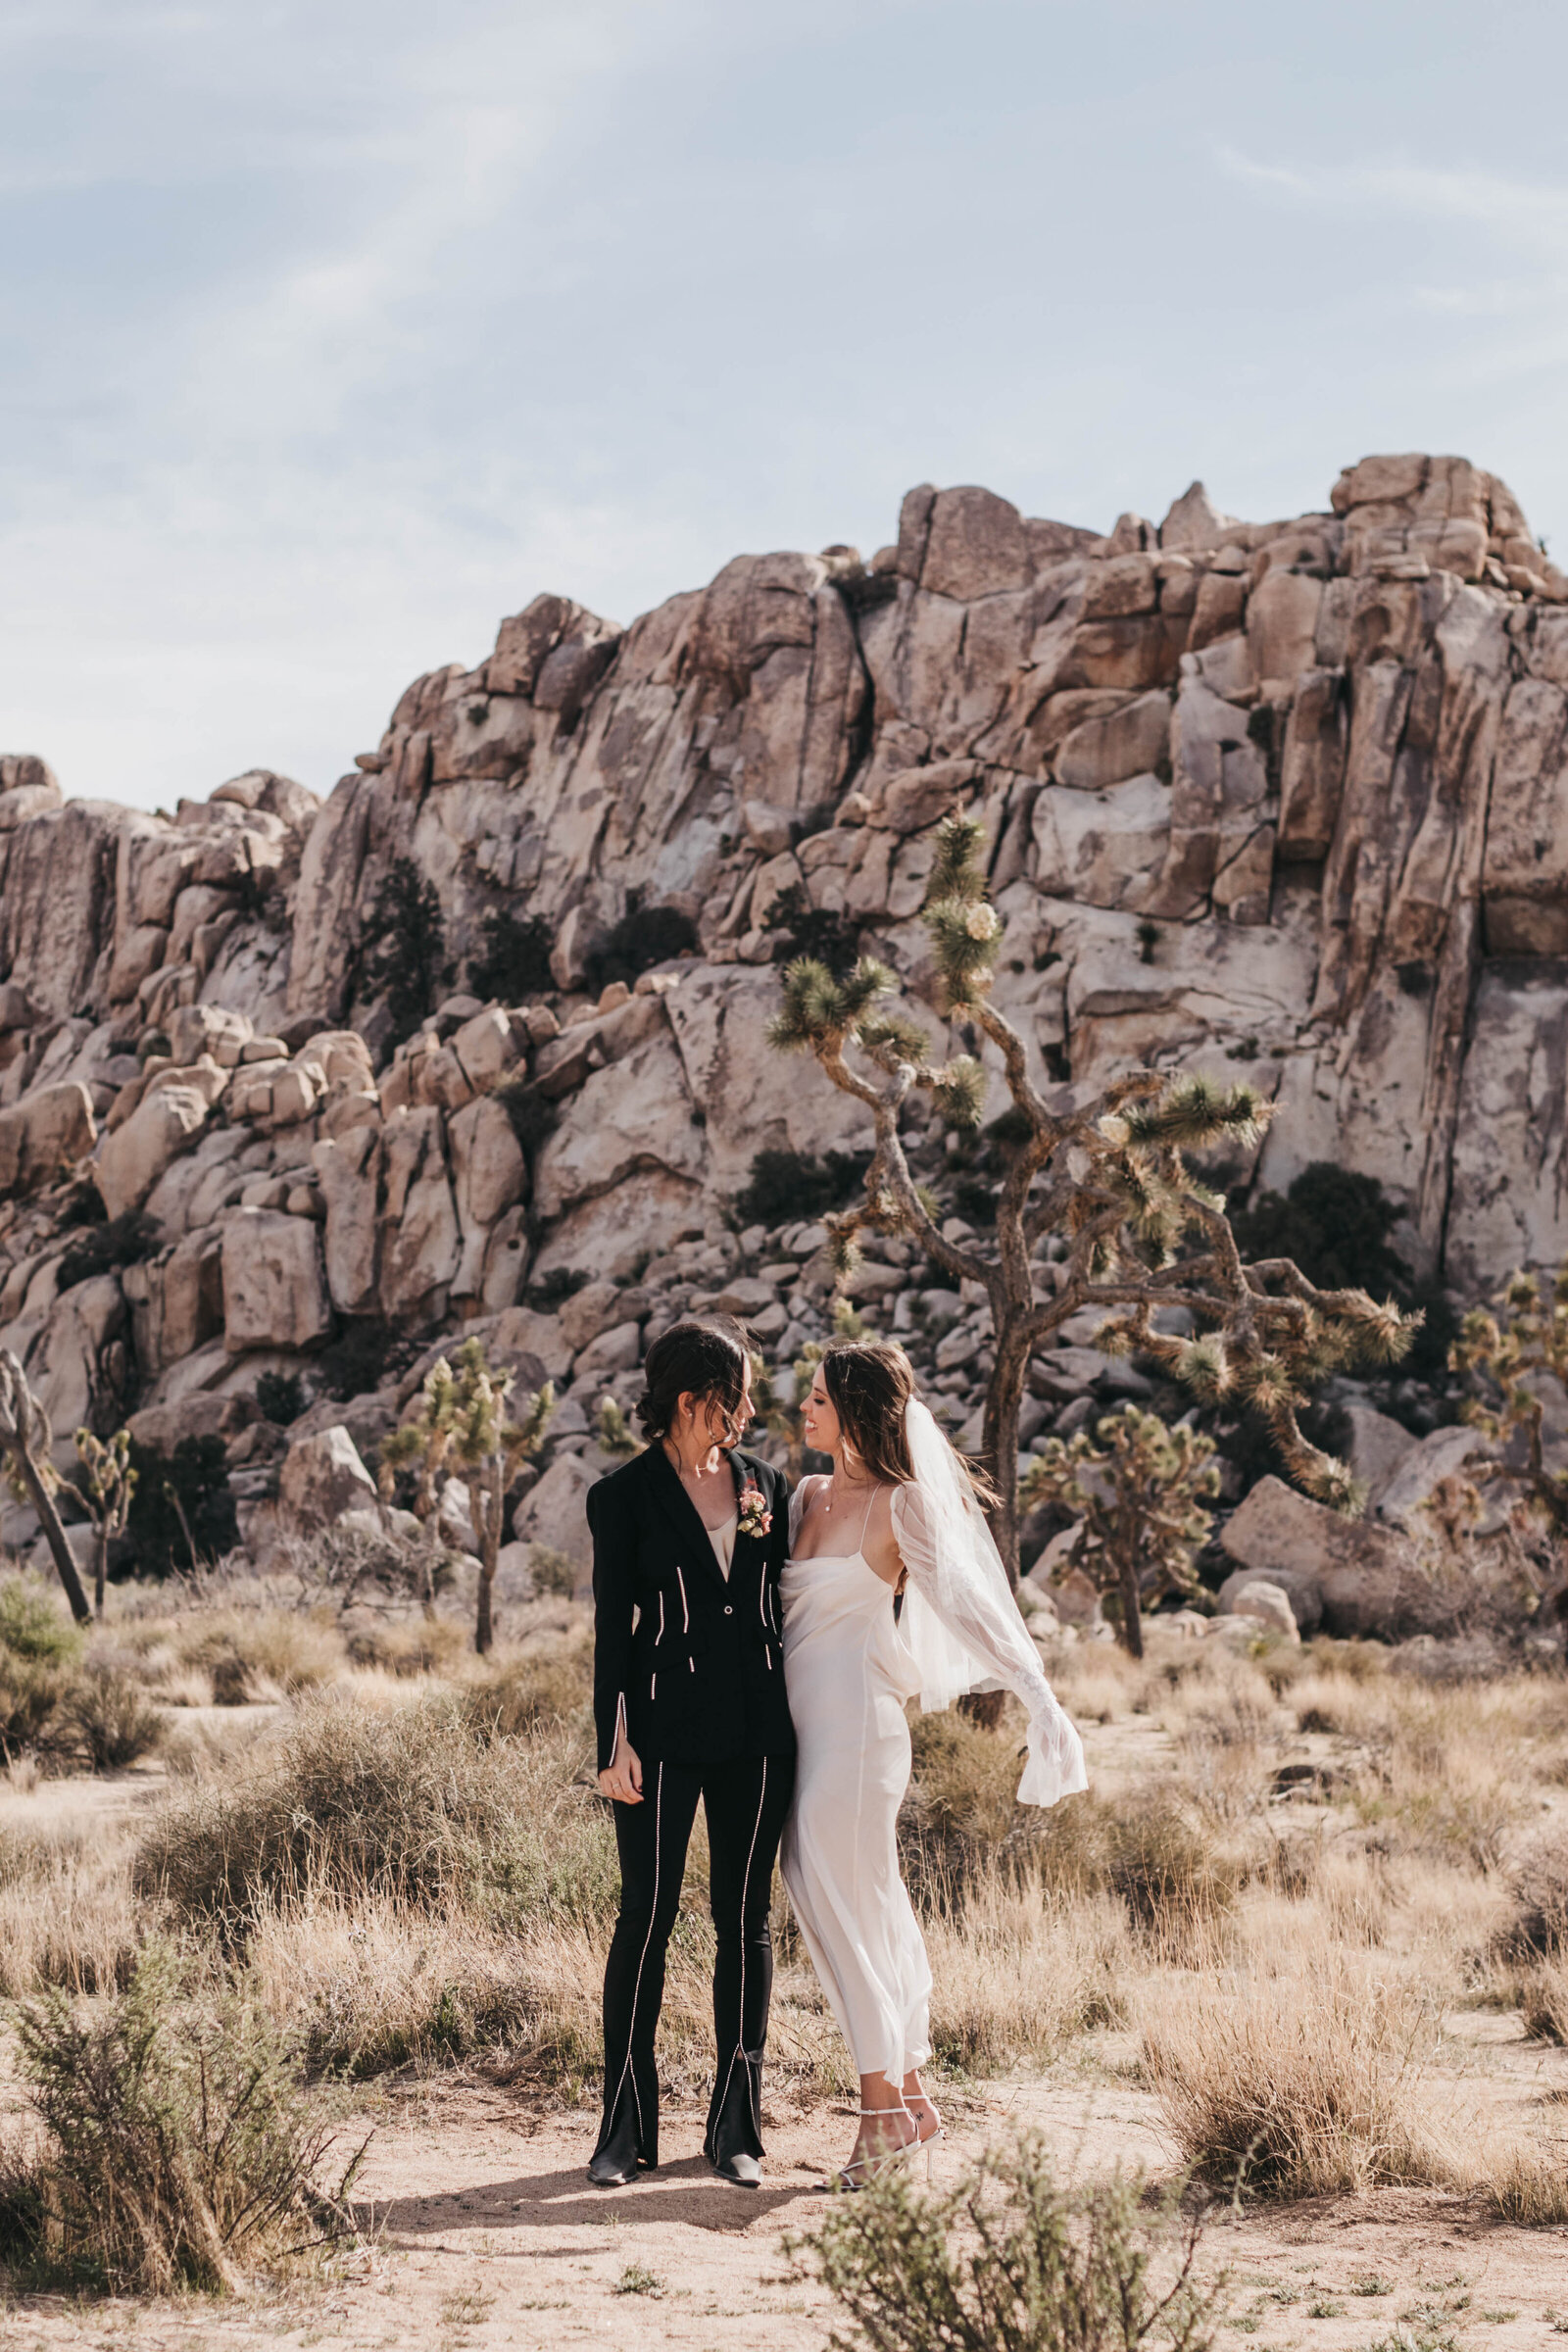 Joshua Tree Elopement photographer specializing in all inclusive elopements